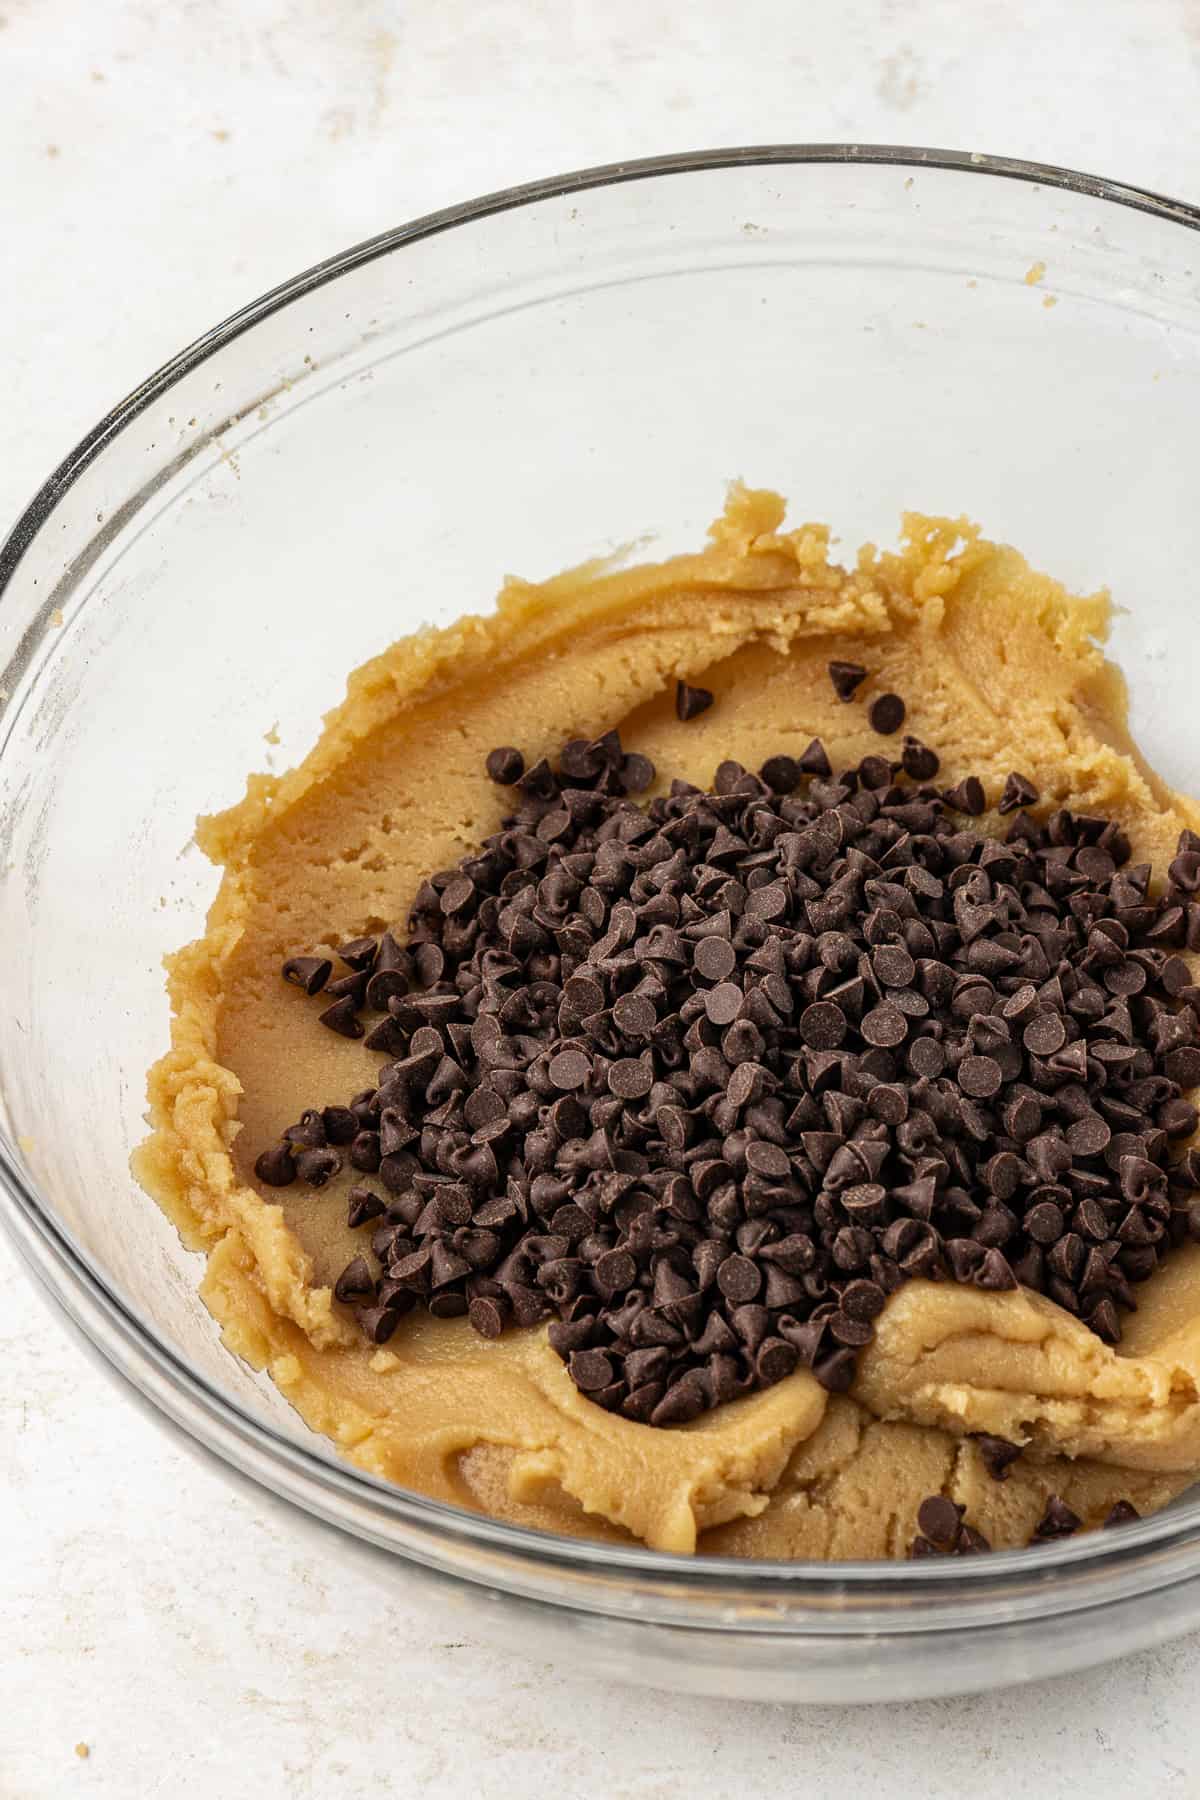 edible cookie dough in a clear glass bowl with a pile of chocolate chips on top